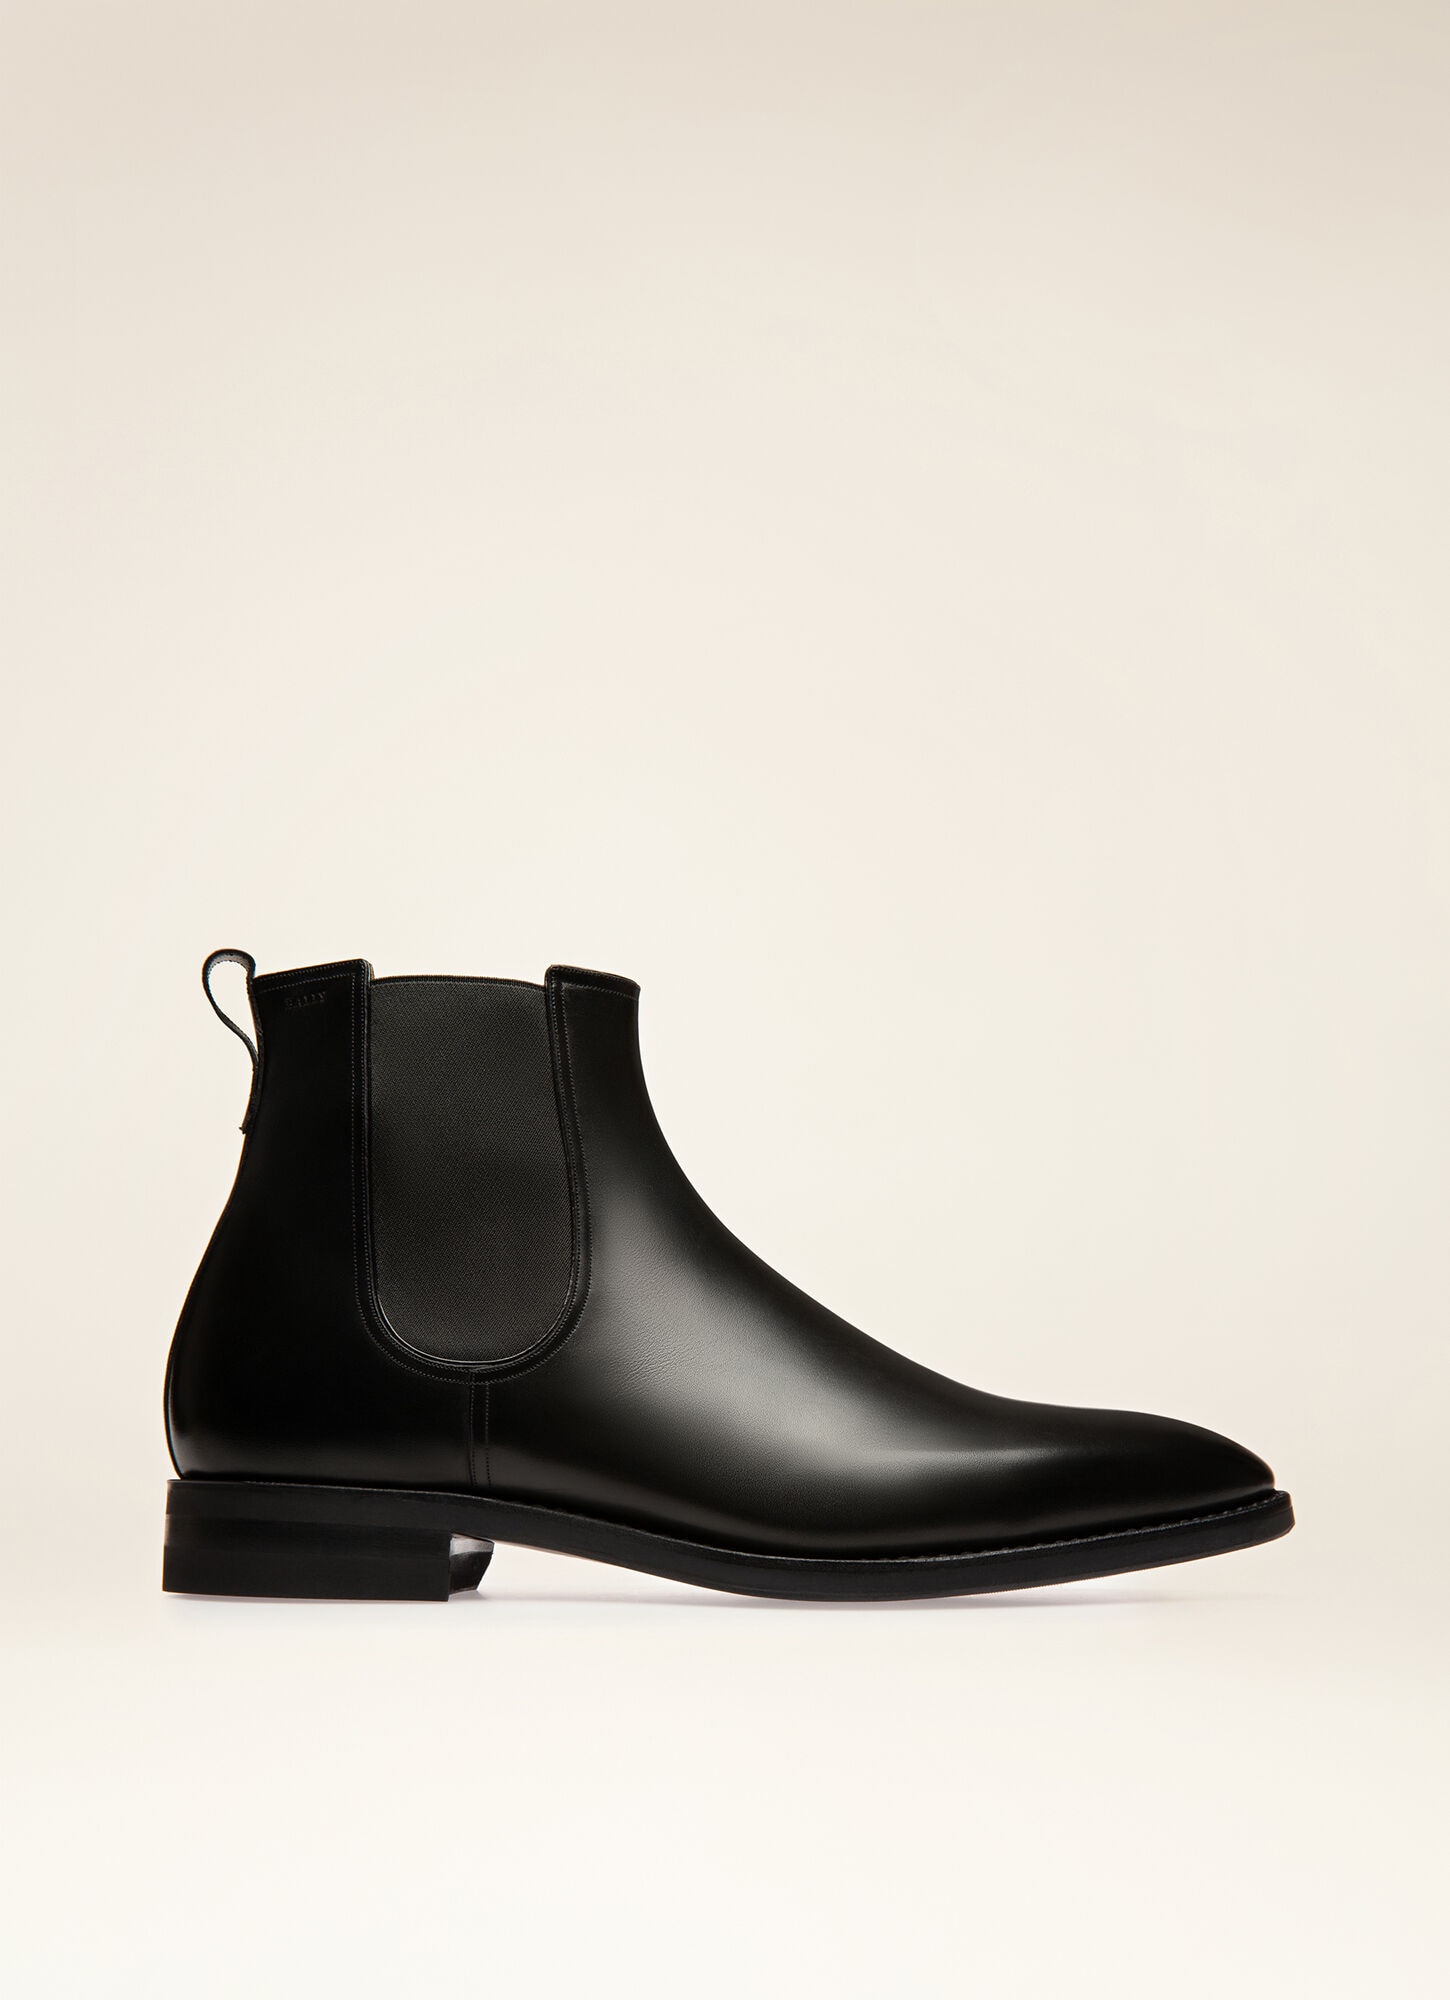 SCAVONE | Men's Boots | Bally Shoes